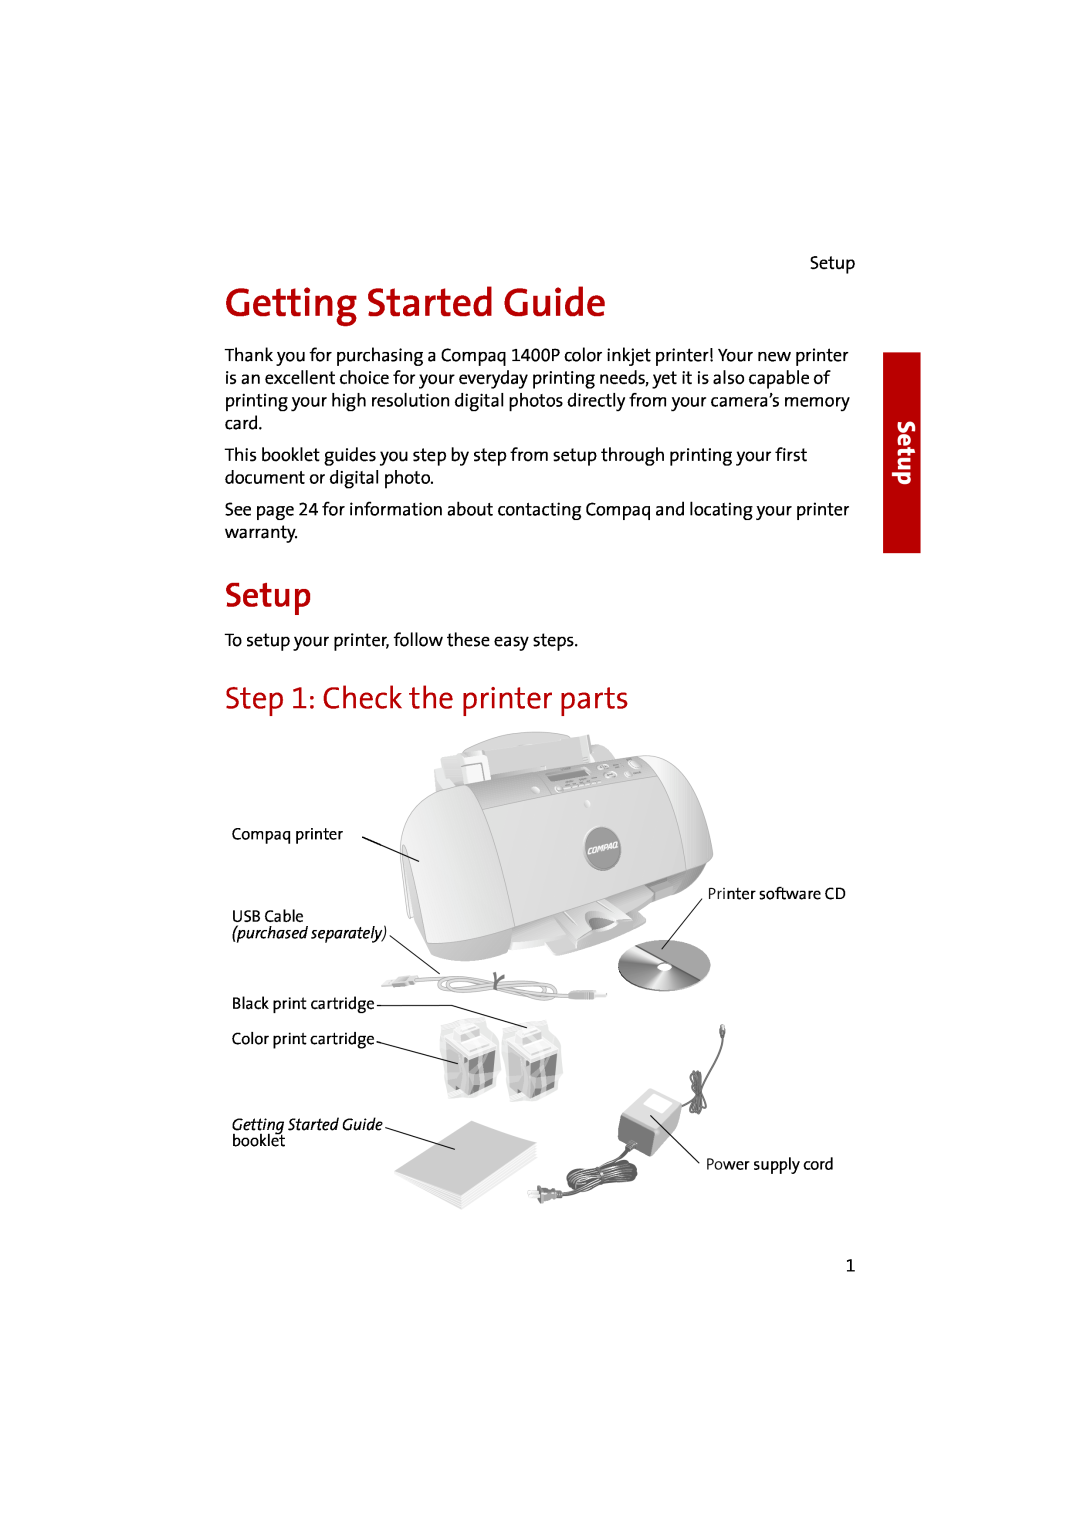 Compaq 1400P manual Getting Started Guide, Setup, Check the printer parts 